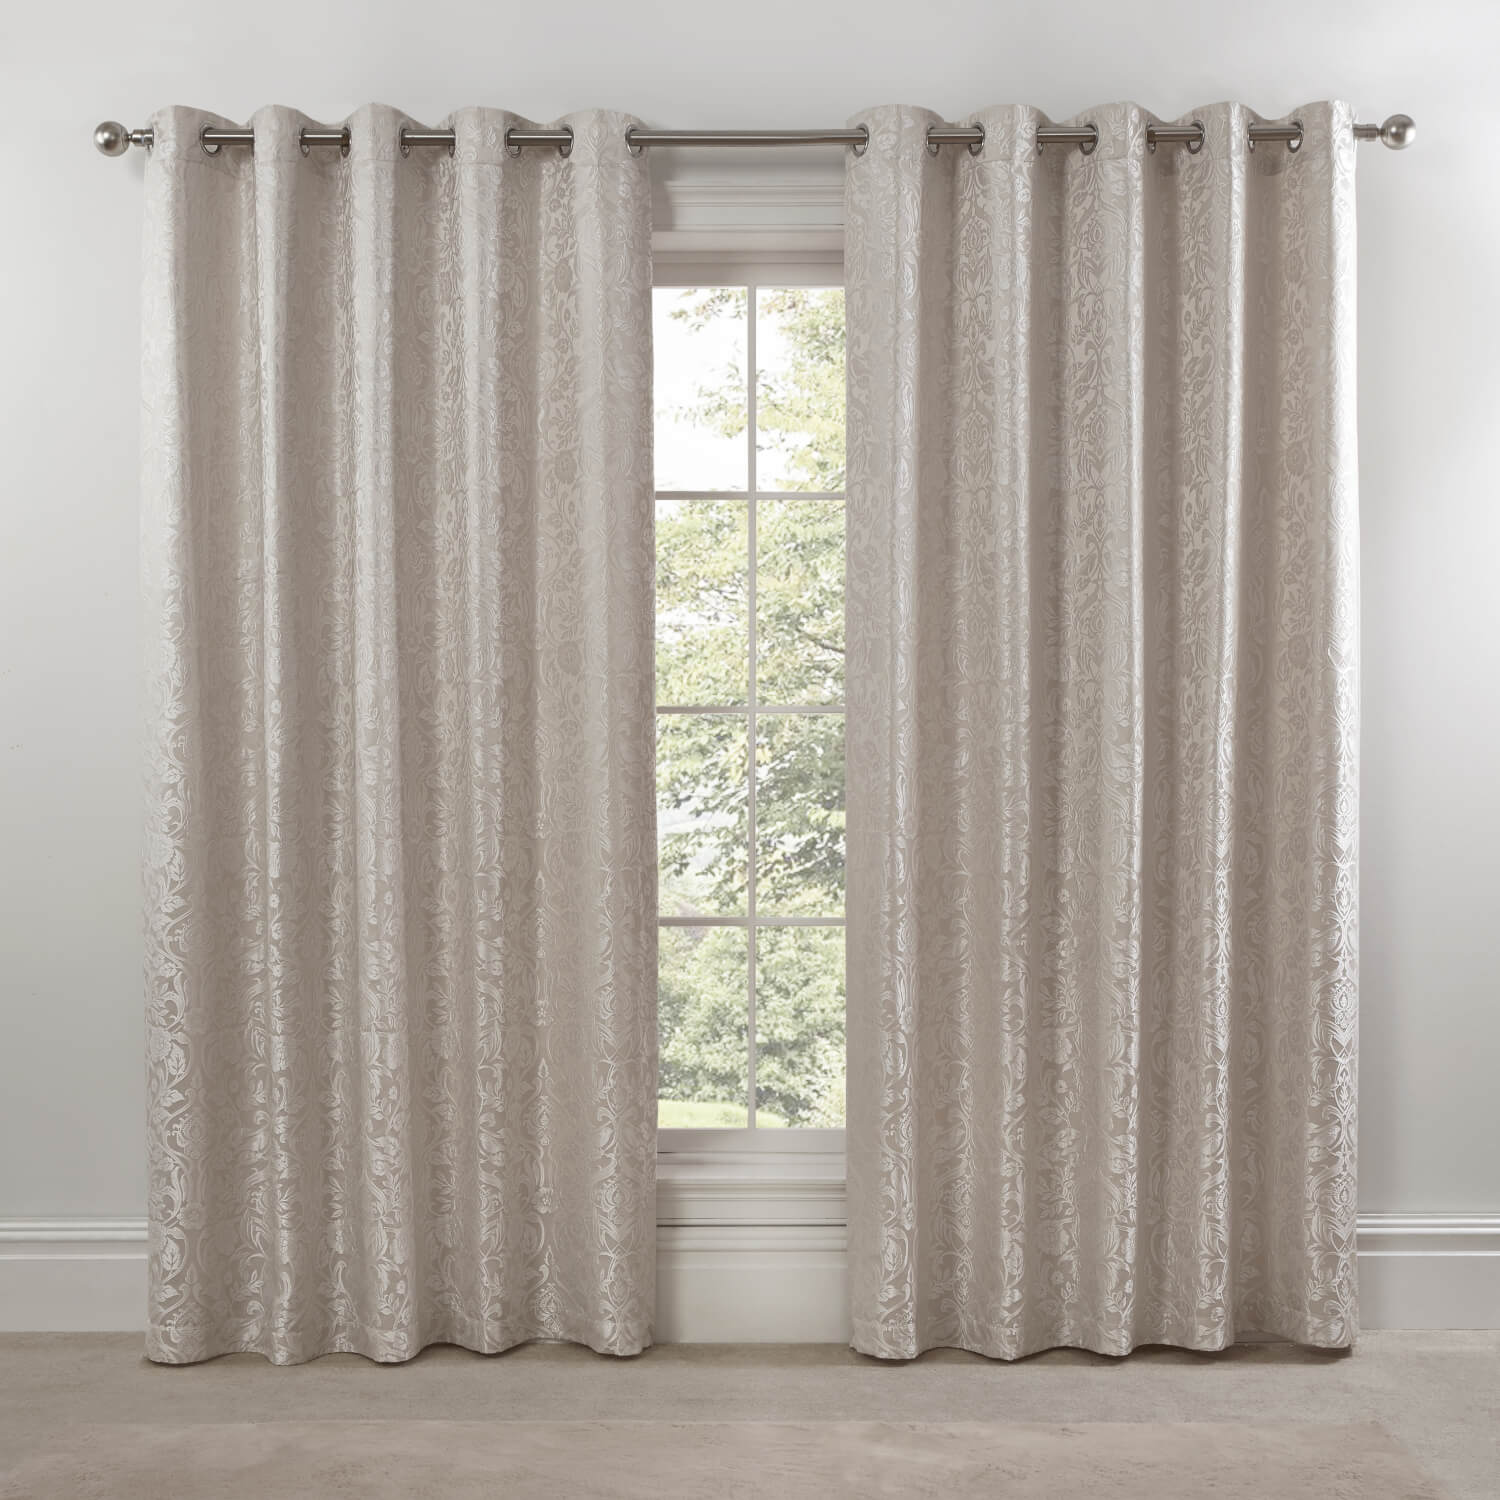 Maison By Emma Barclay Lined Eyelet Jacquard Curtains - Cream 4 Shaws Department Stores